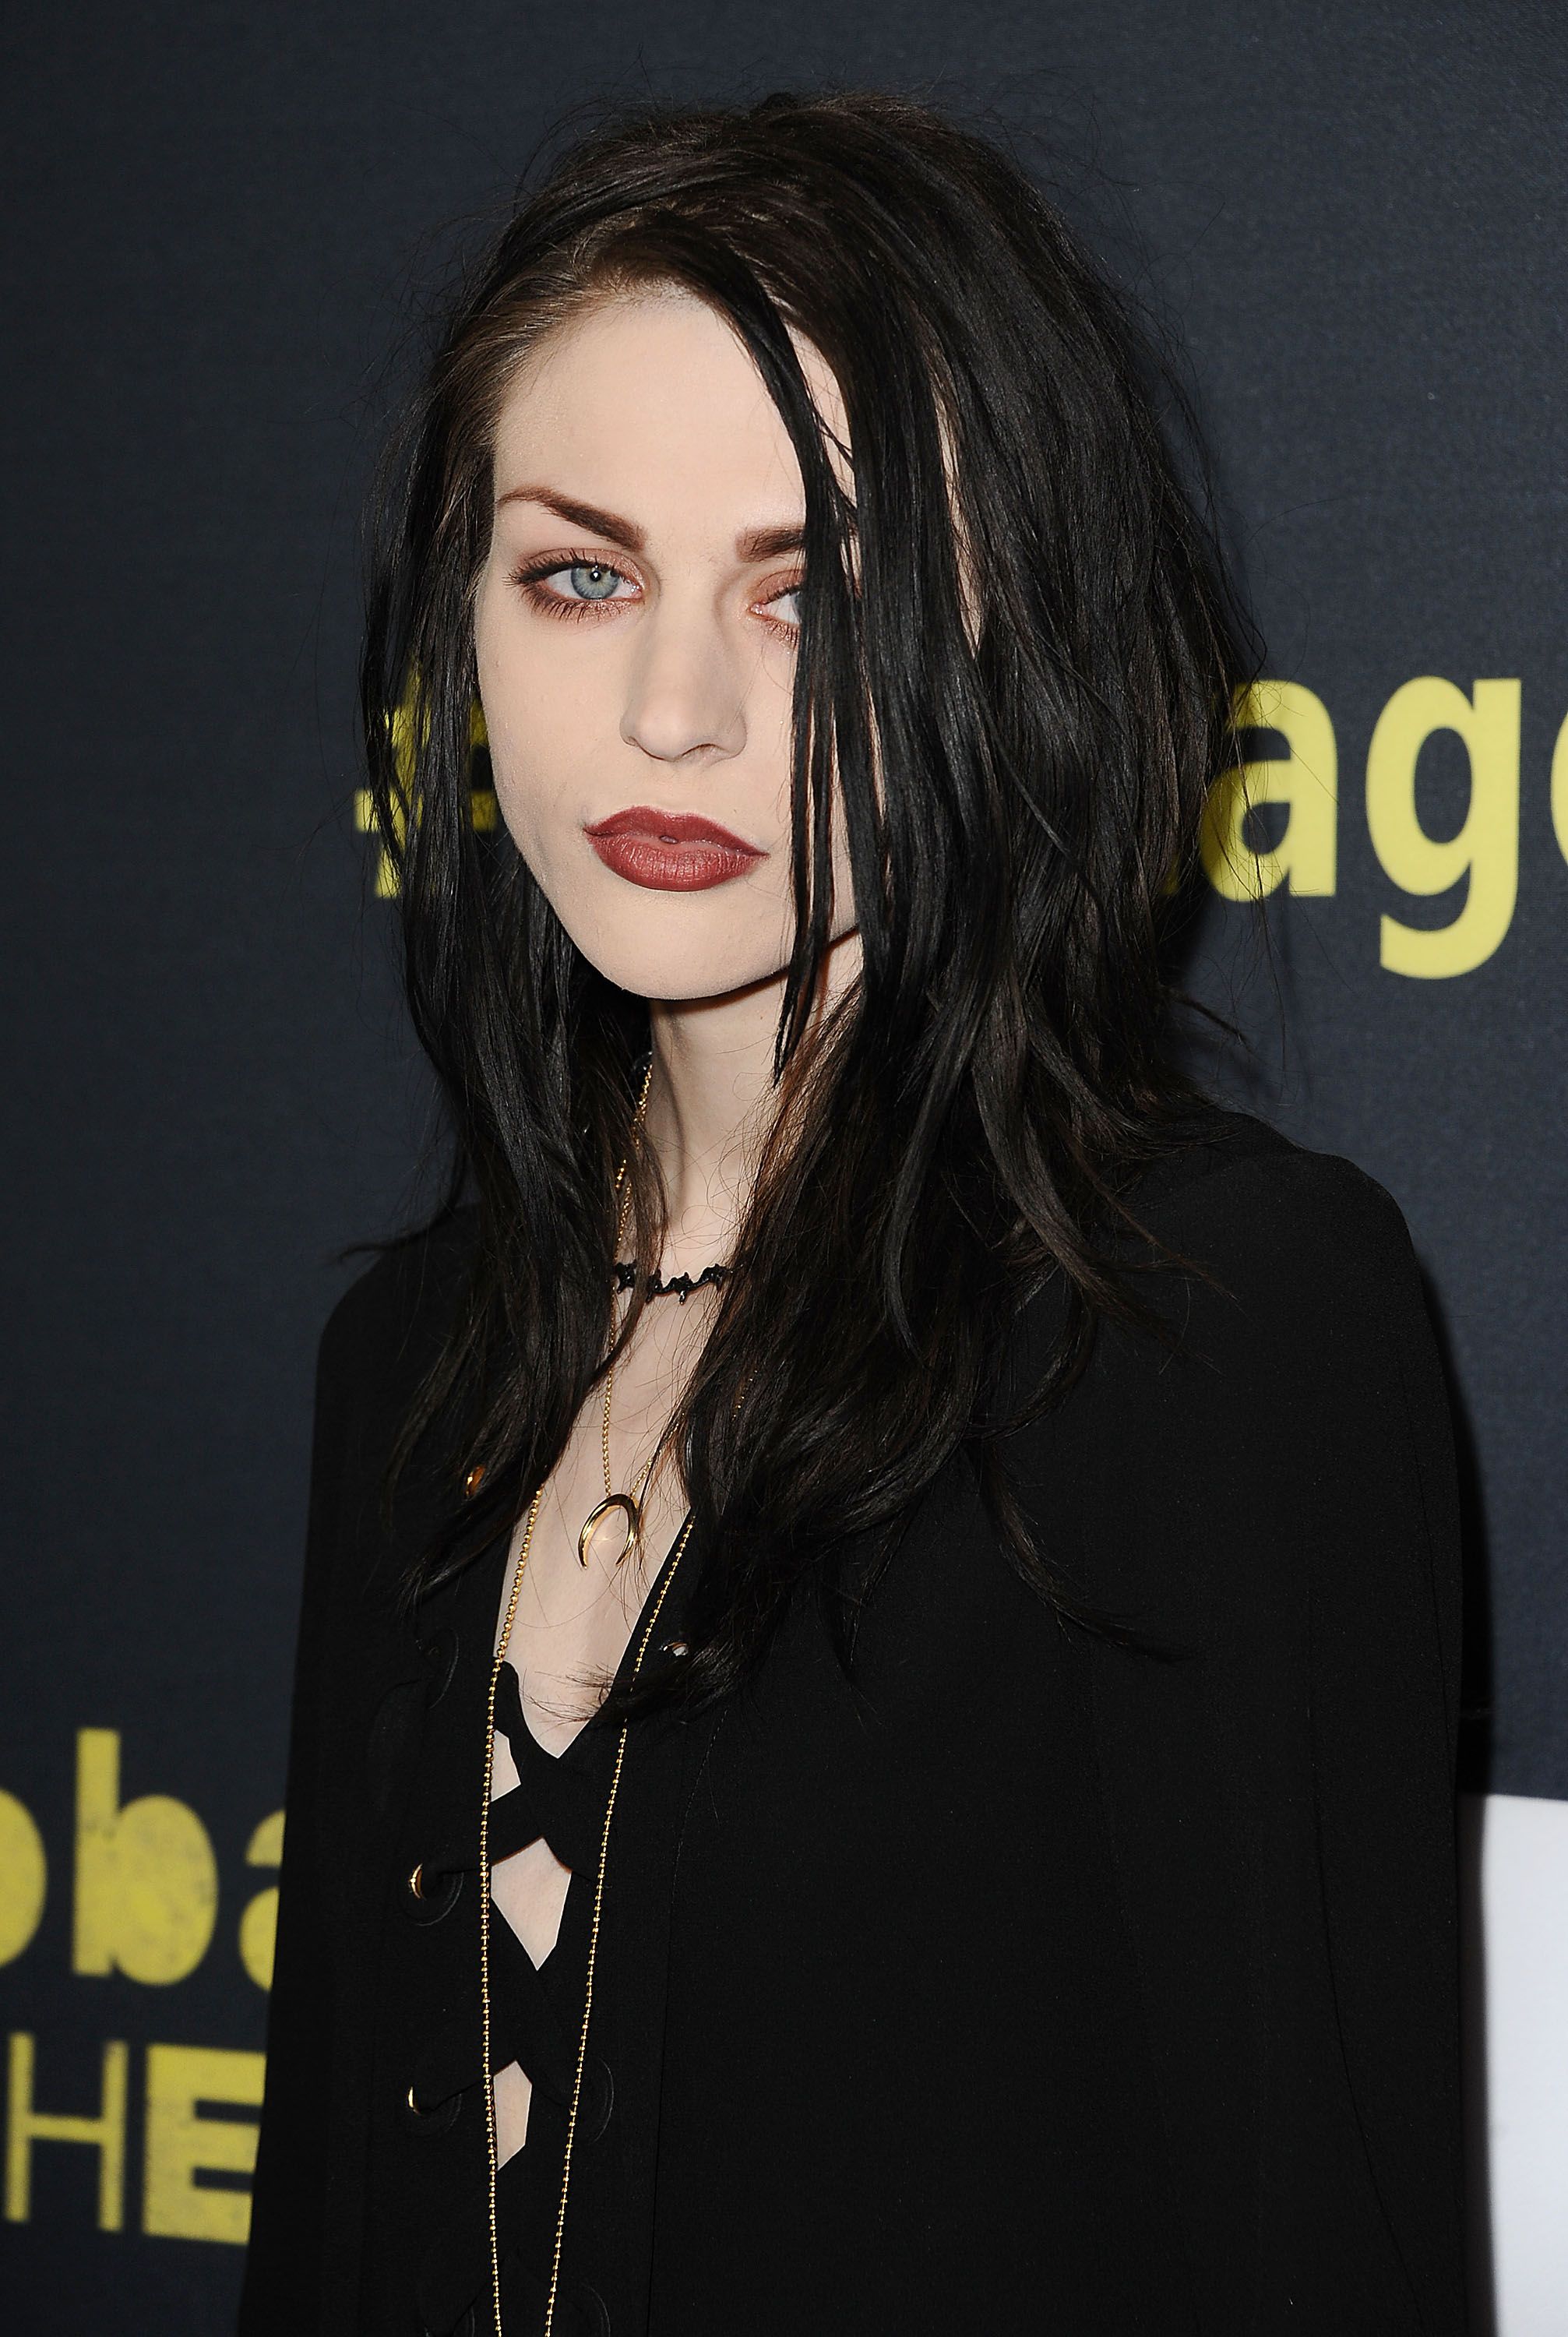 Frances Bean Cobain at the premiere of "Kurt Cobain: Montage Of Heck" in 2015 in Hollywood, California | Source: Getty Images